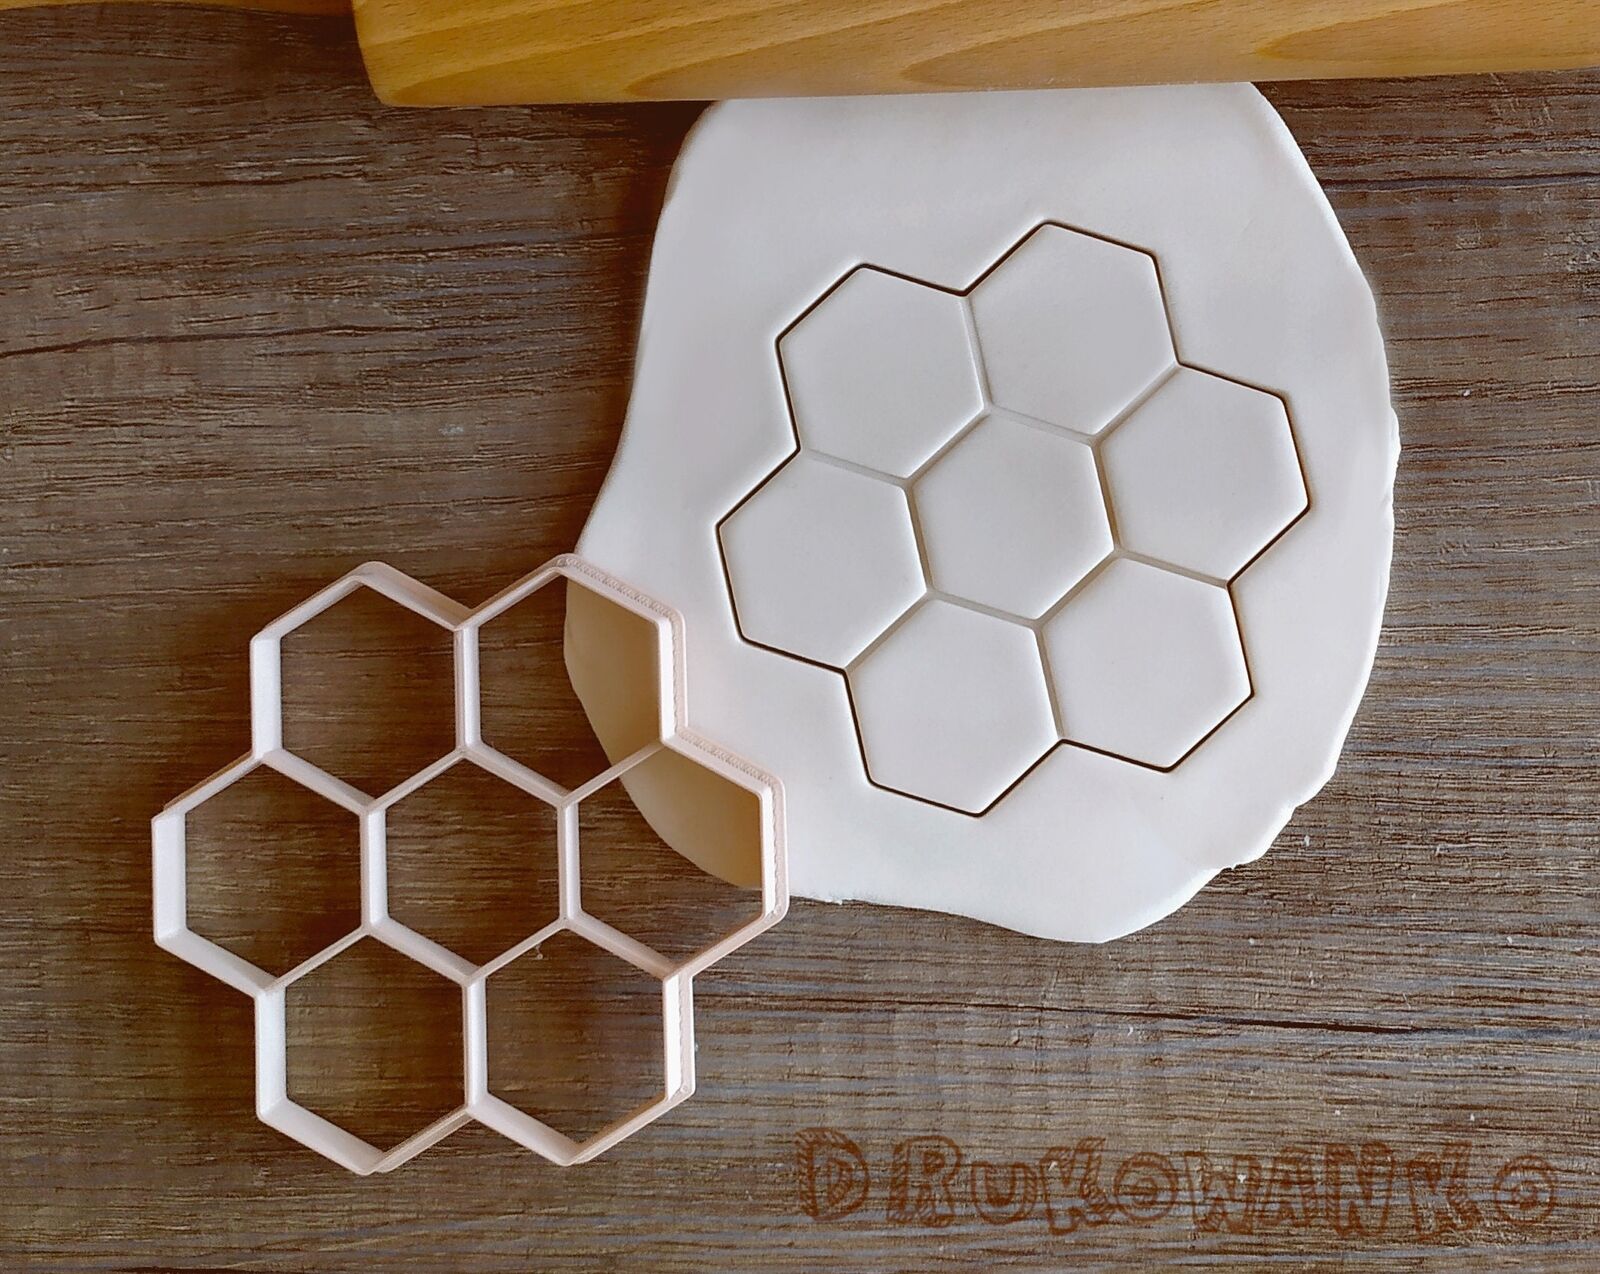 Honey Comb Stick Sweet Bee Hex Insect Animal Cookie Cutter